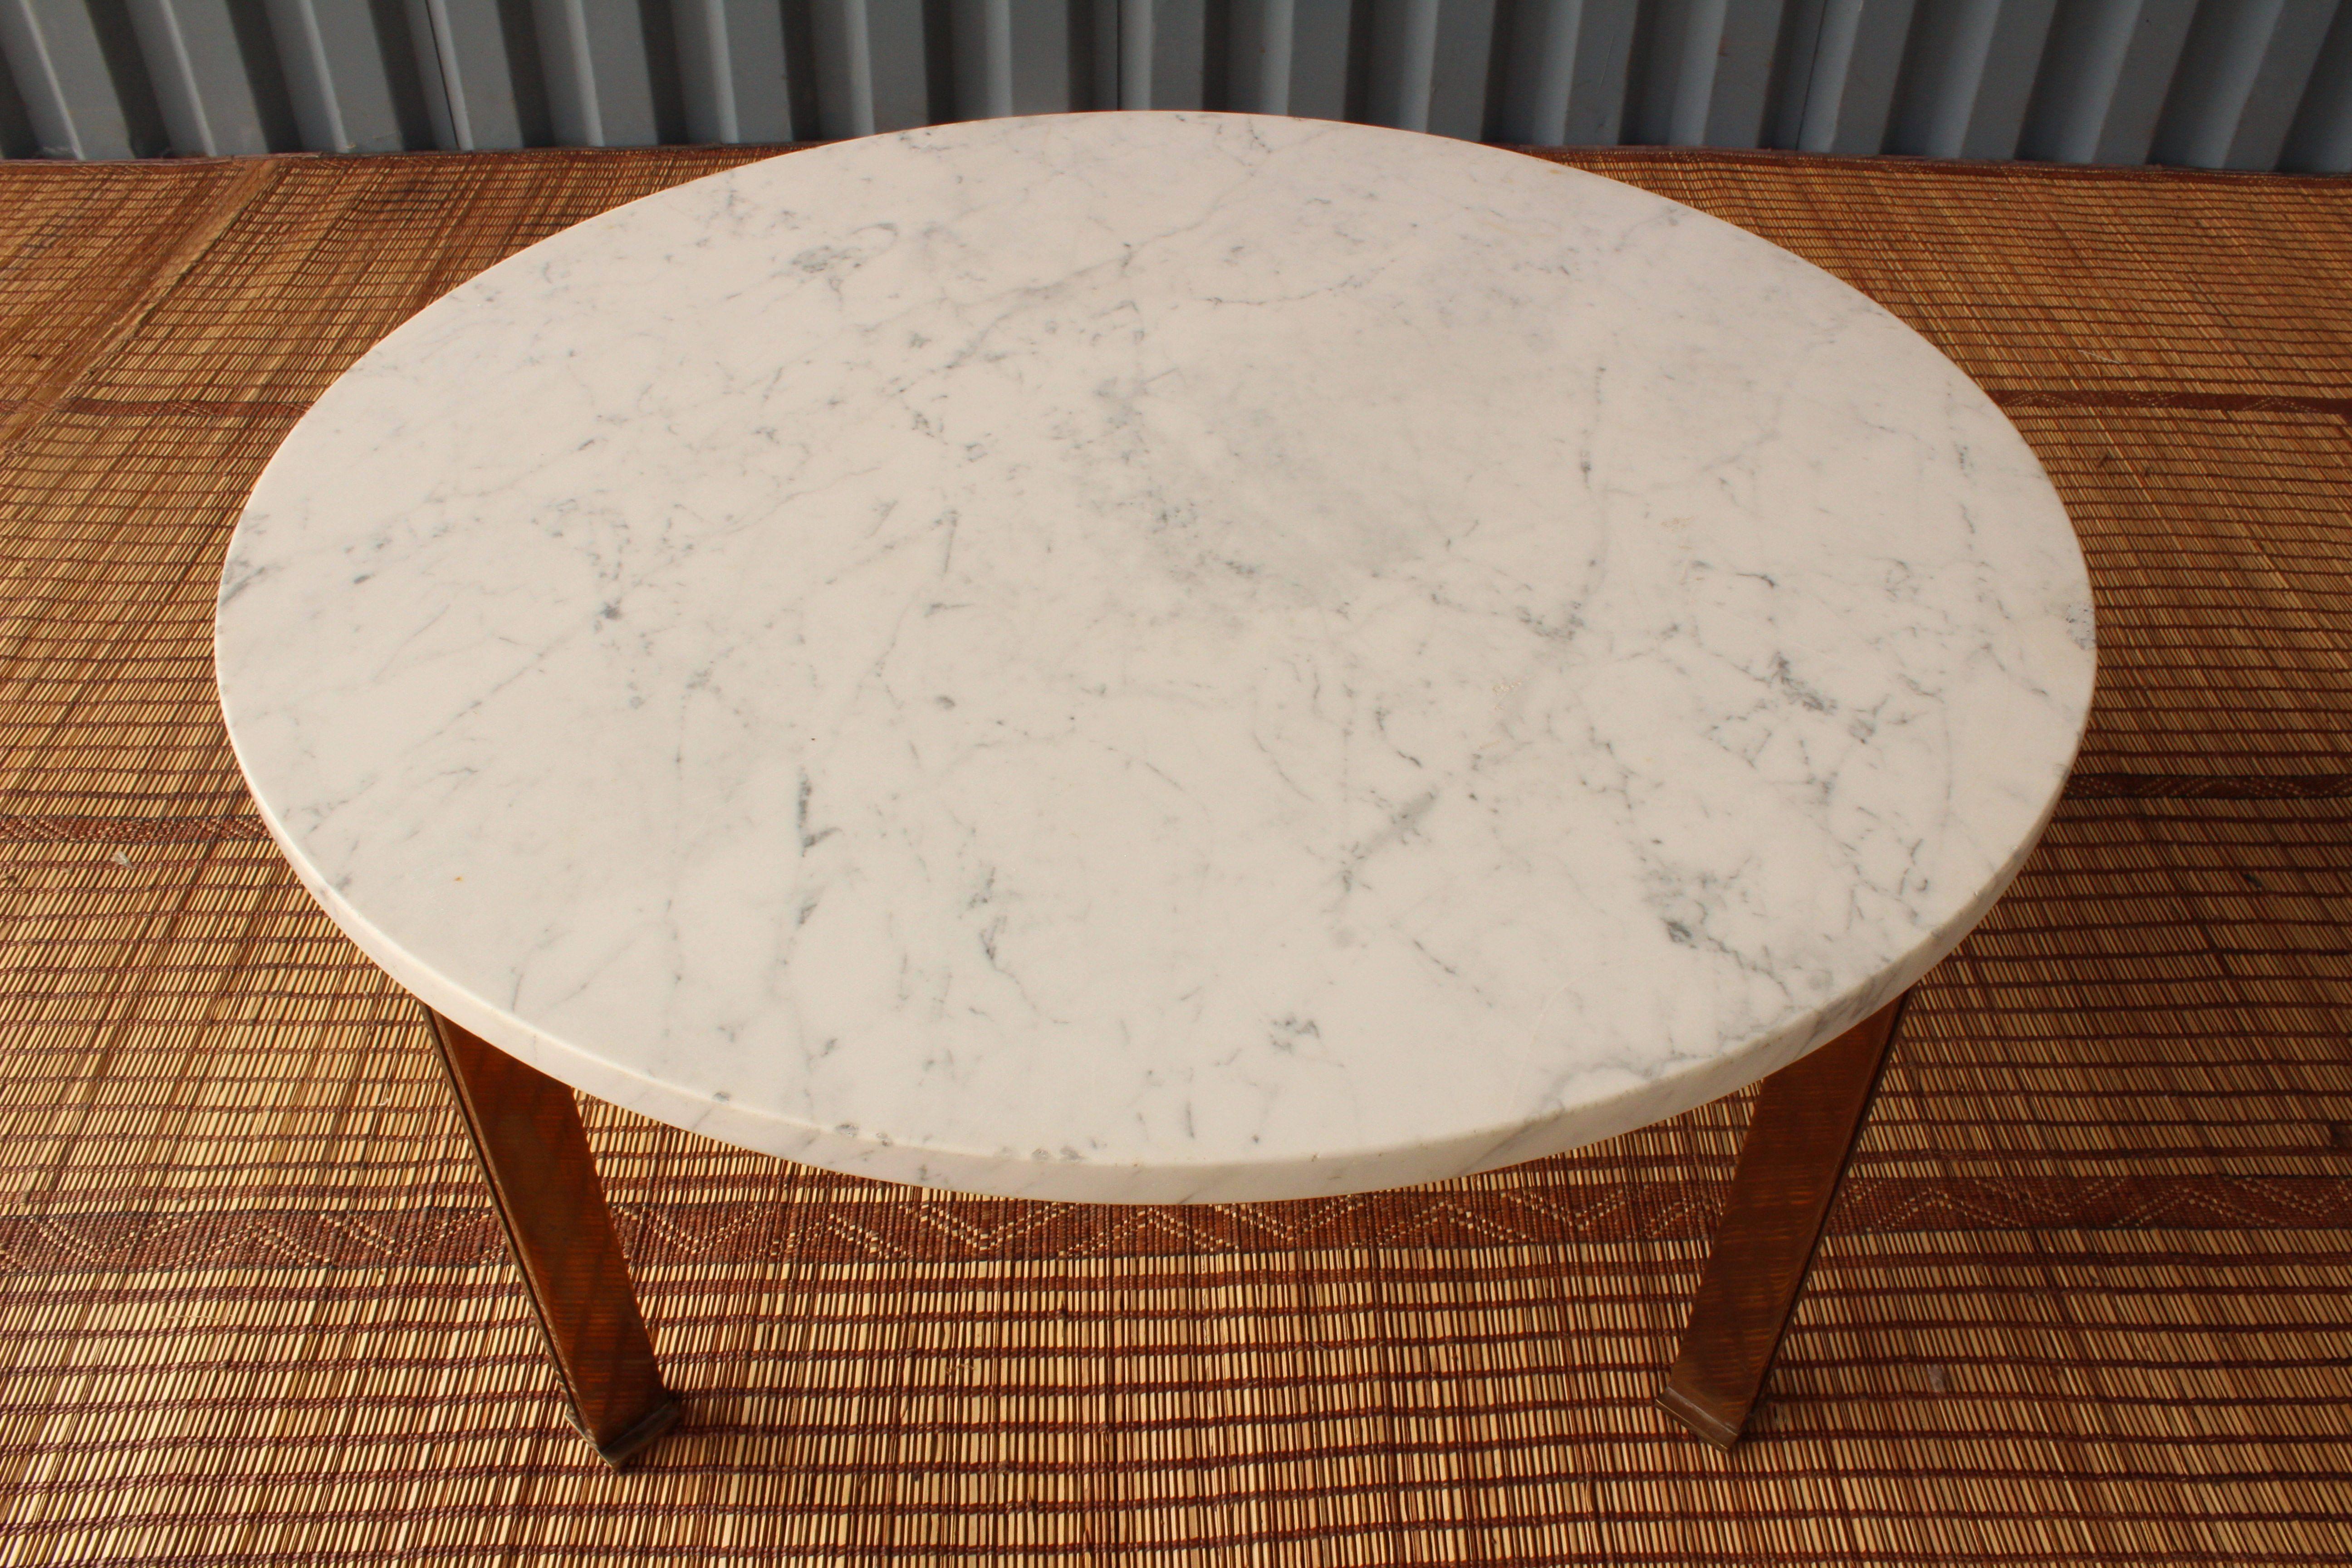 Vintage 1960s coffee table with solid bronze legs and a marble surface in the manner of Jacques Quinet. Bronze legs show age appropriate patina. The marble surface has minor wear as seen in photos.